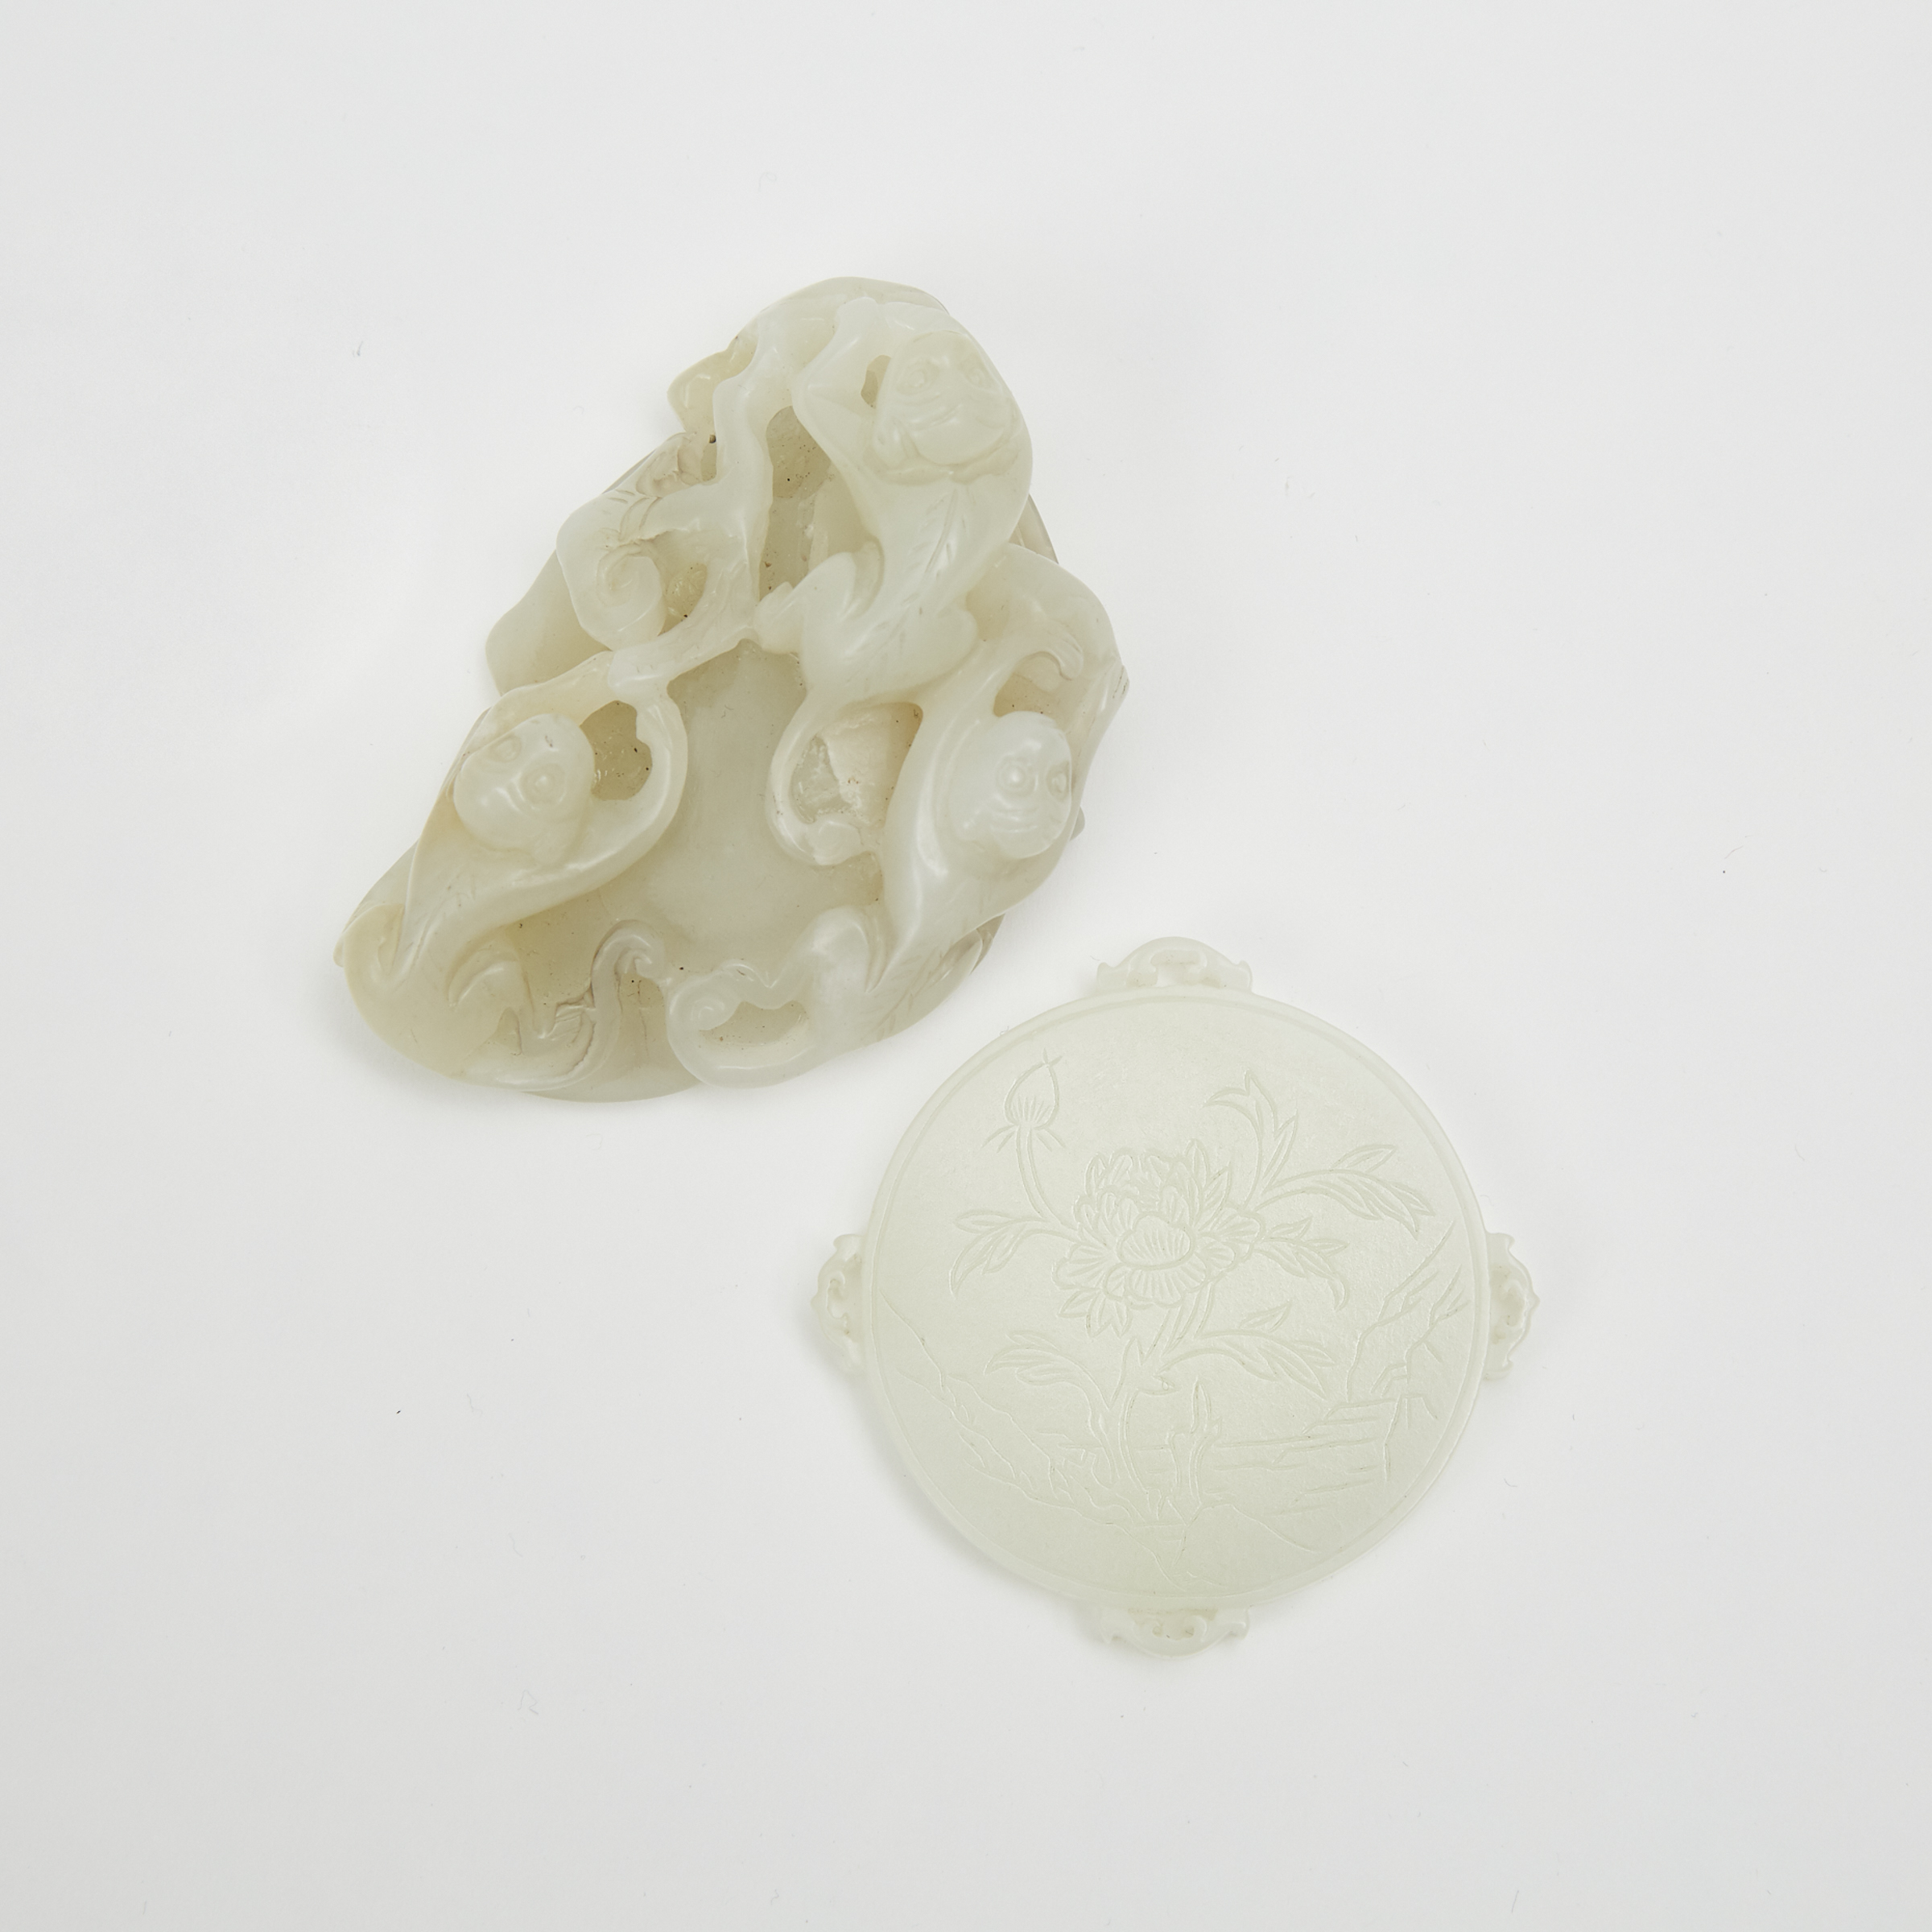 Two White Jade Carvings of He-He Erxian Plaque and Monkeys